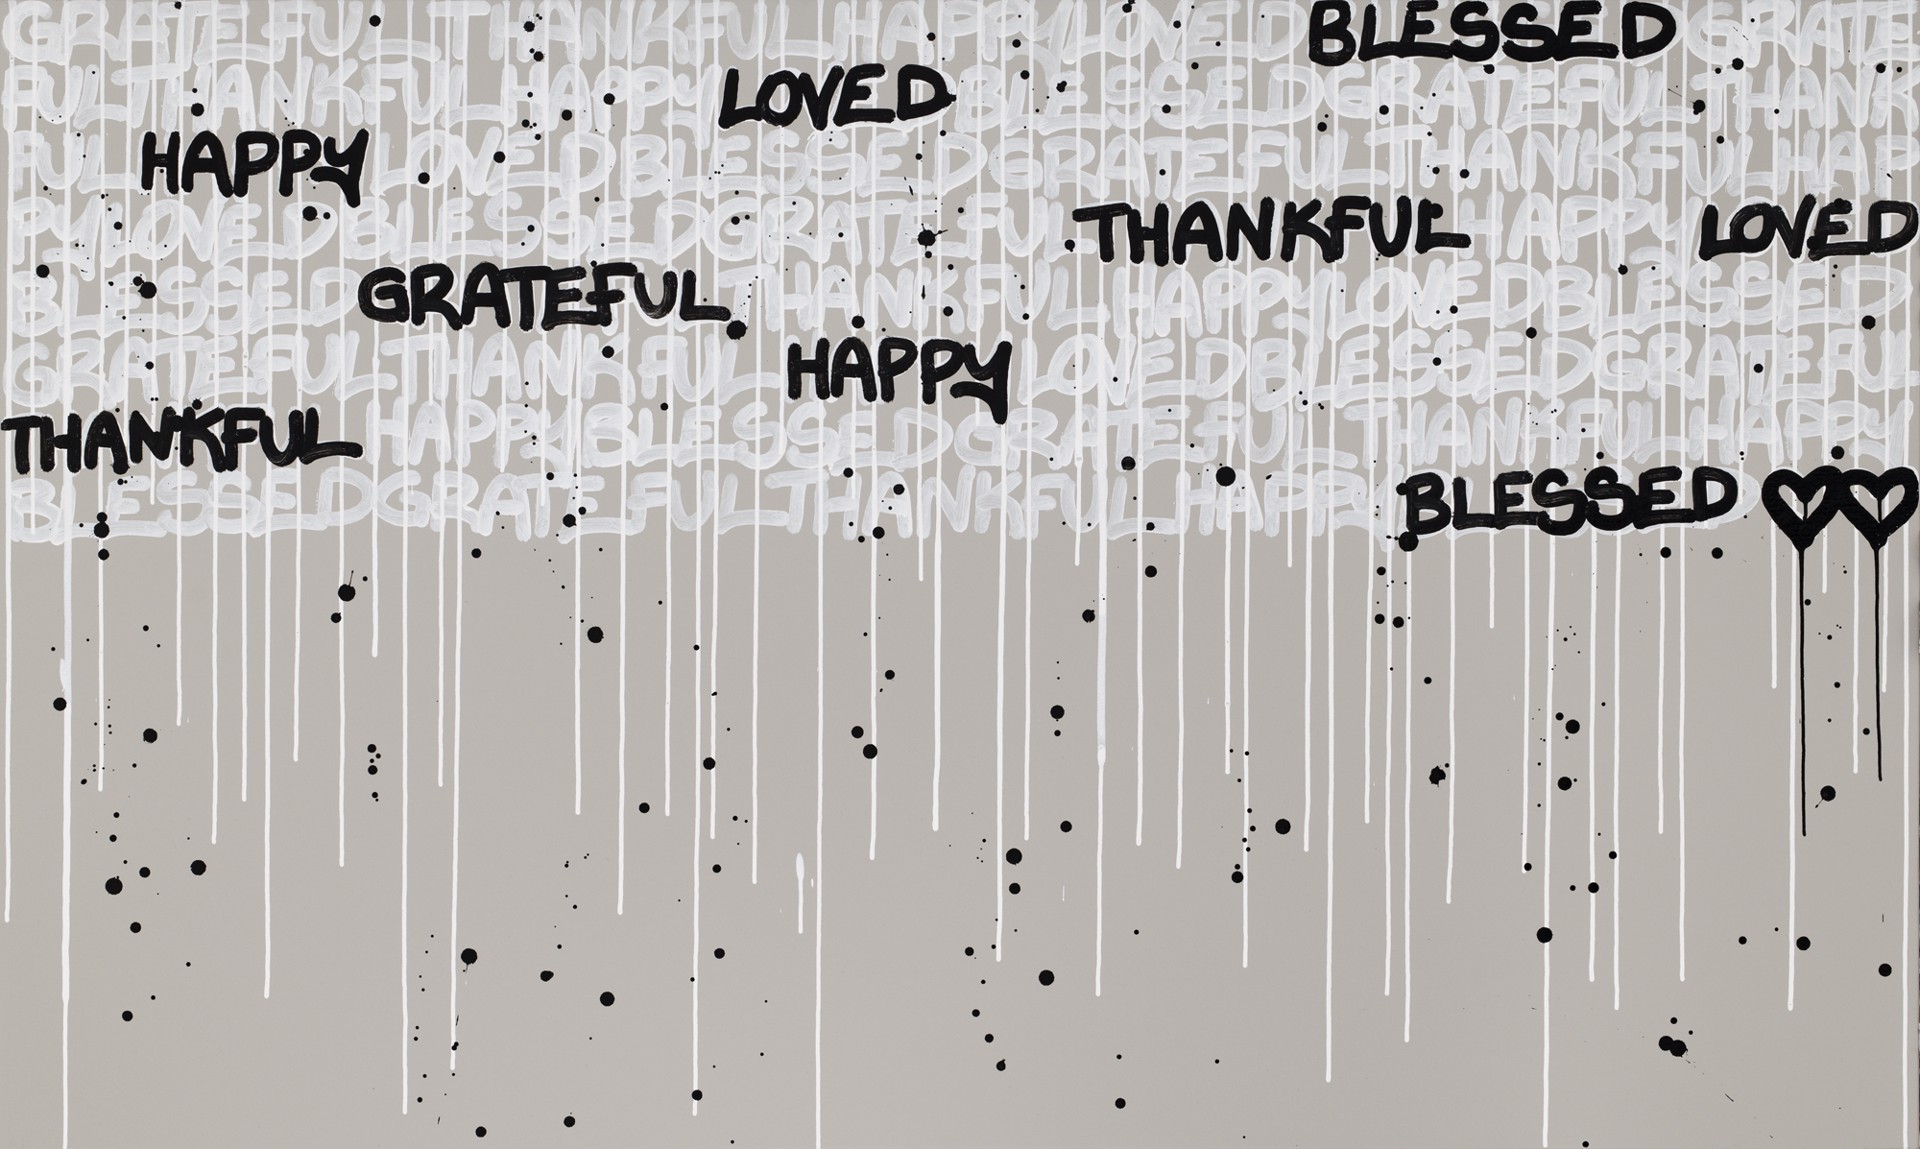 Blessed, Happy and Grateful by Amber Goldhammer